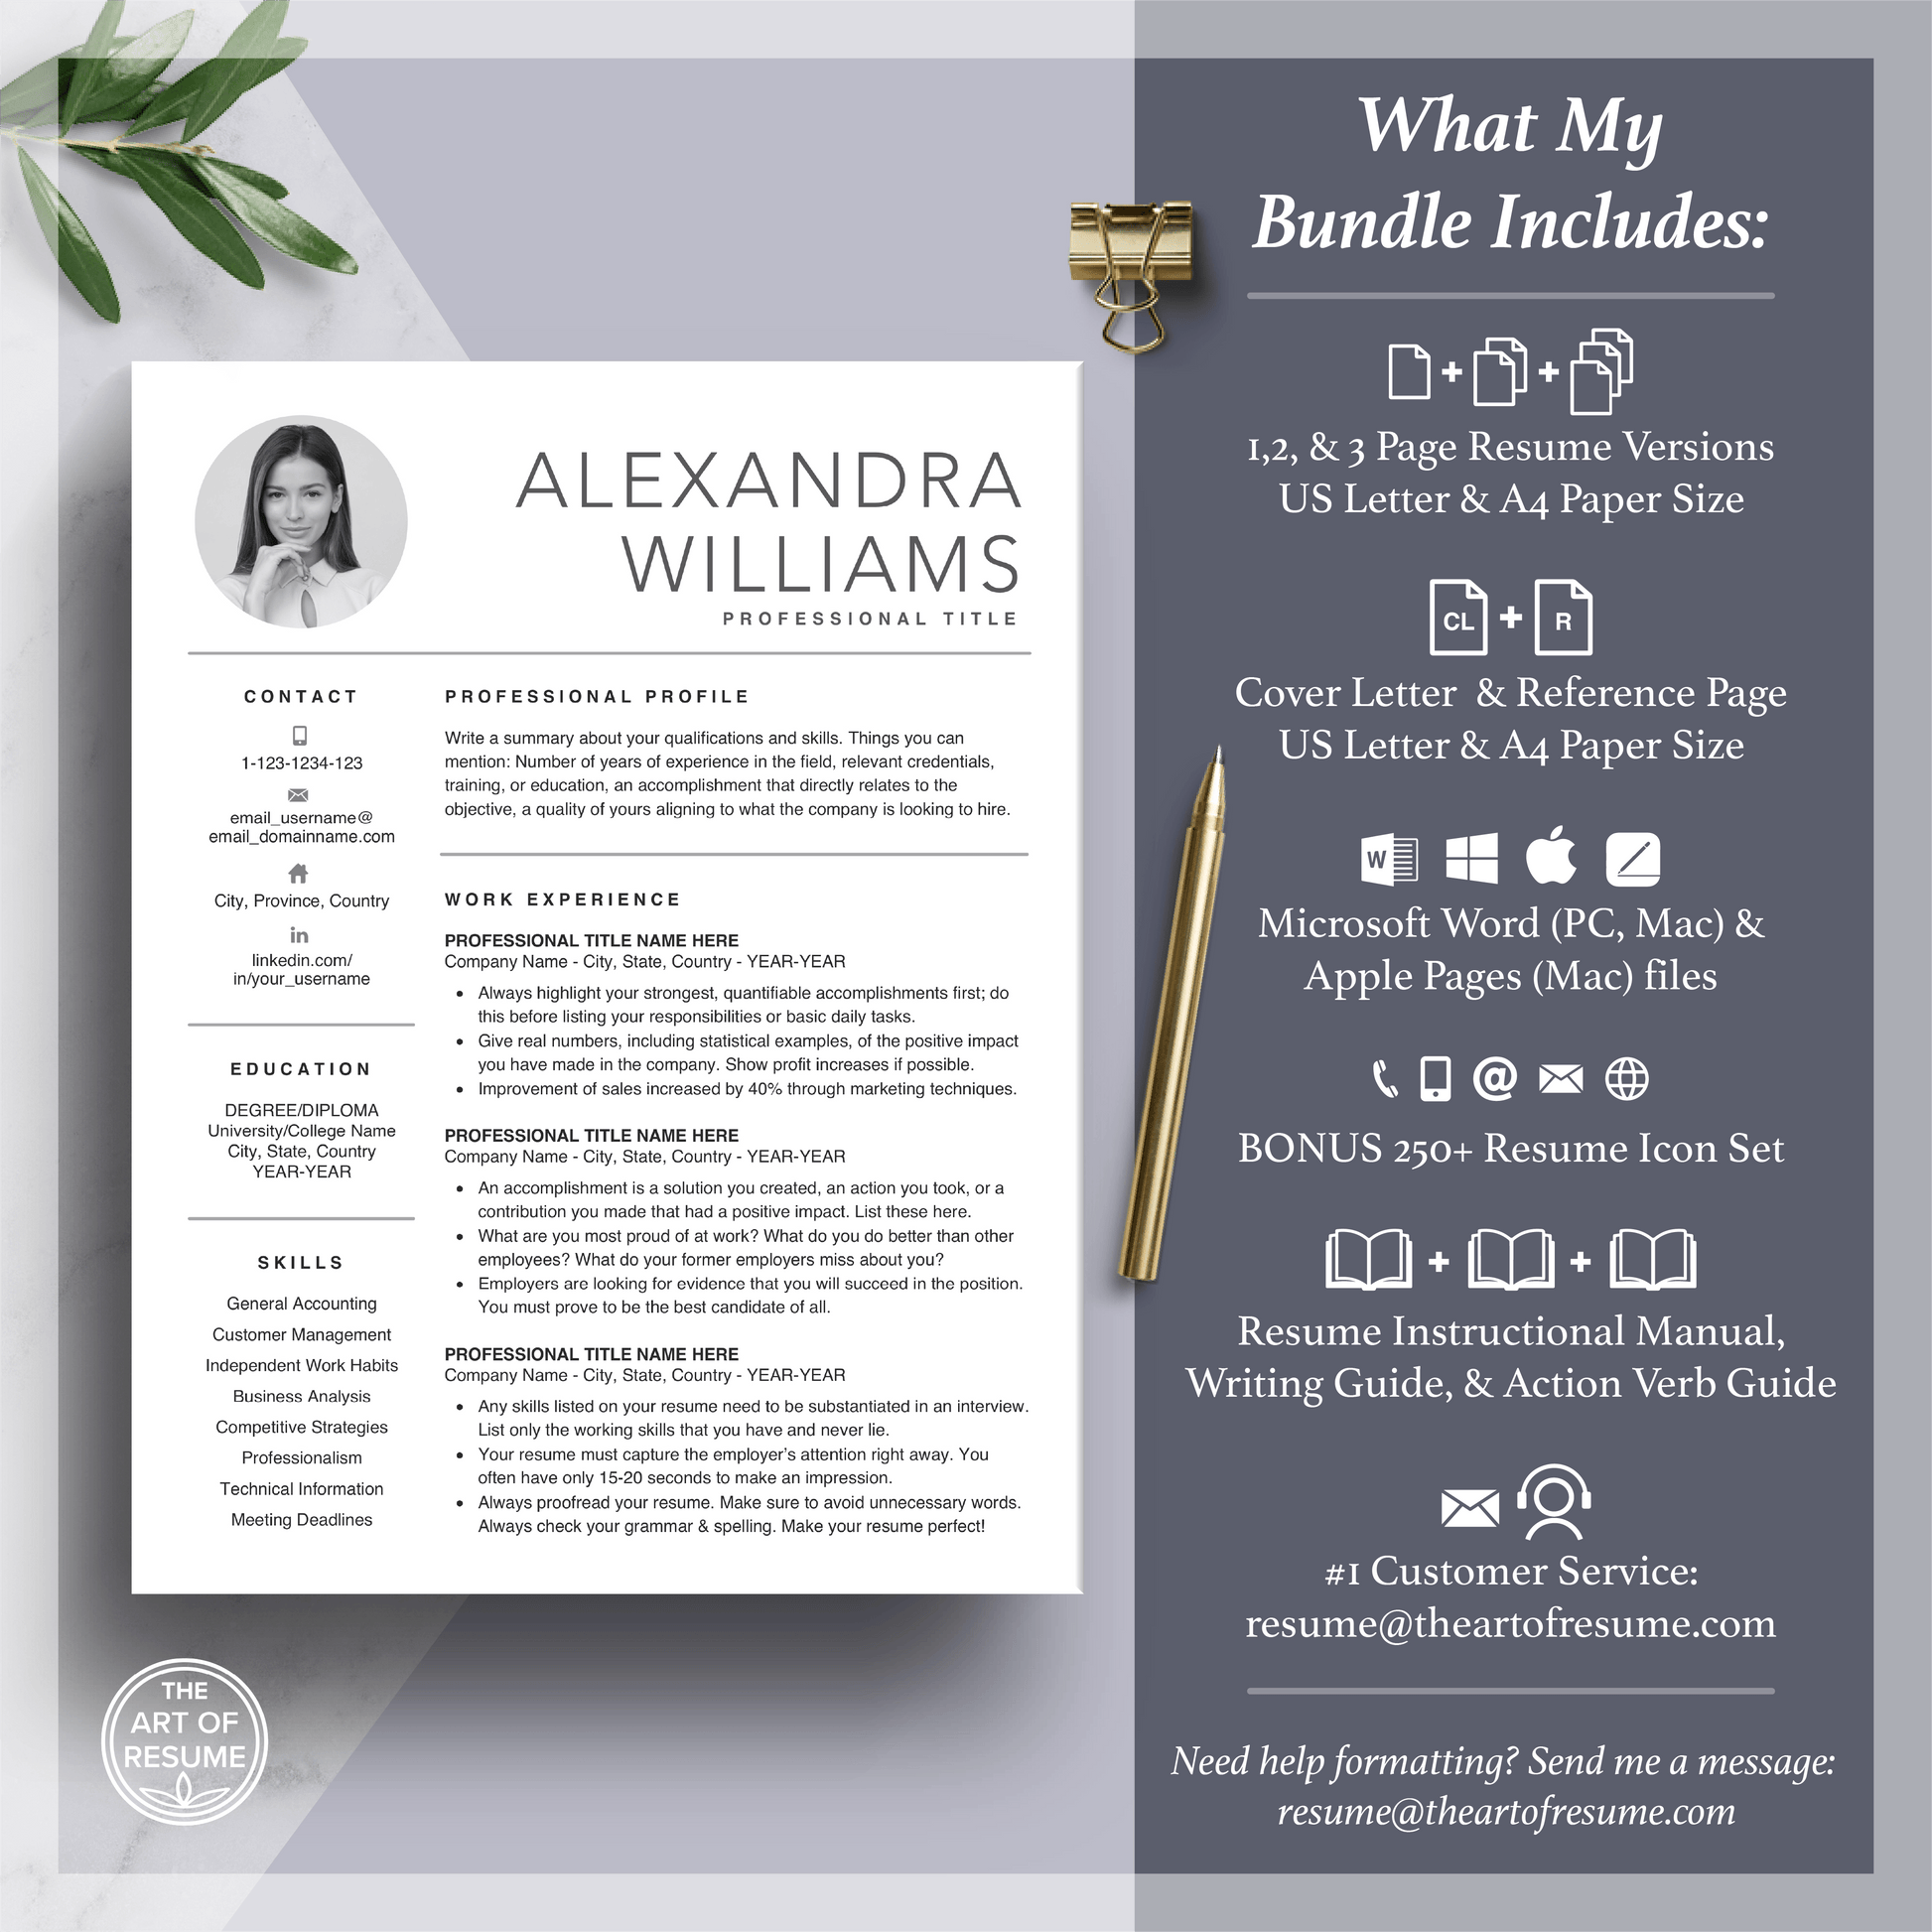 Professional Resume Template Design with Headshot Photo Insert - The Art of Resume